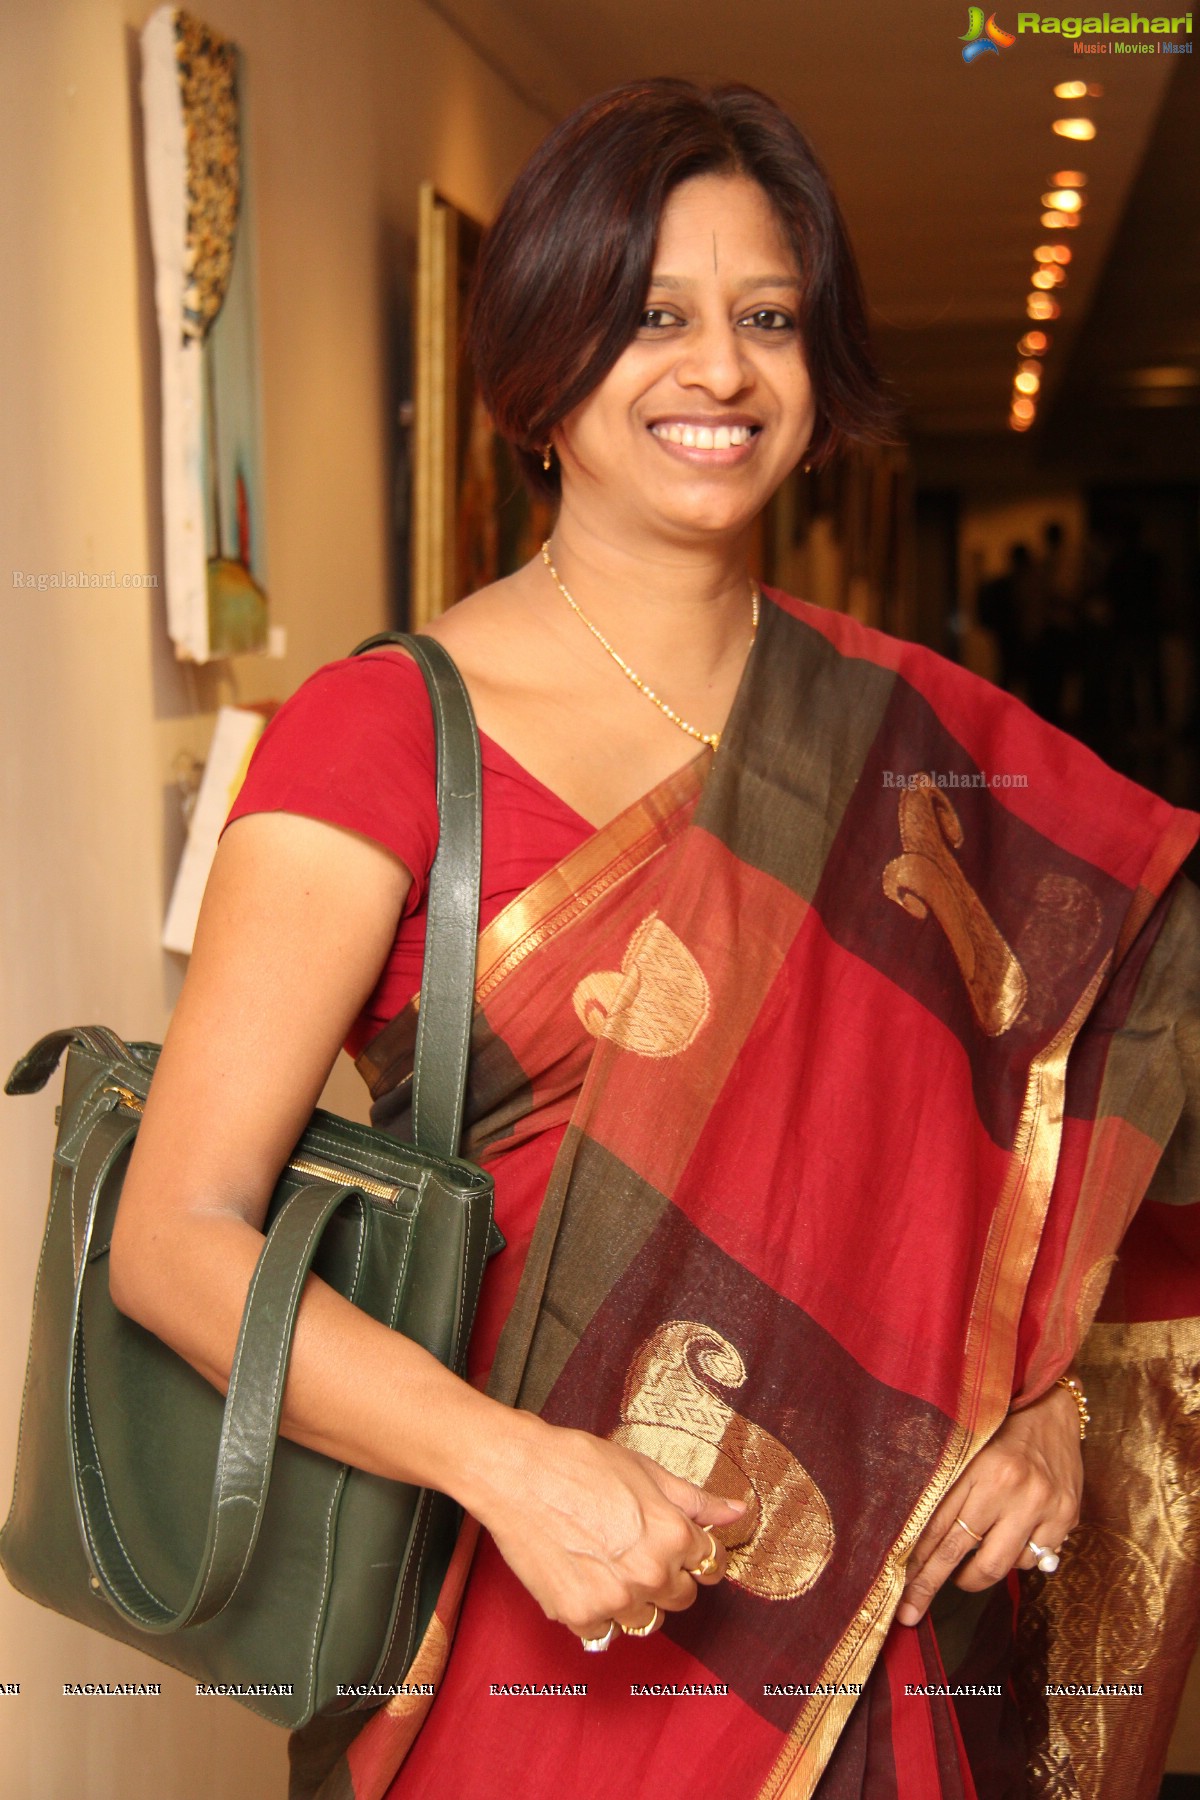 The Inspirationz Art Exhibition at Muse Art Gallery, Hyderabad